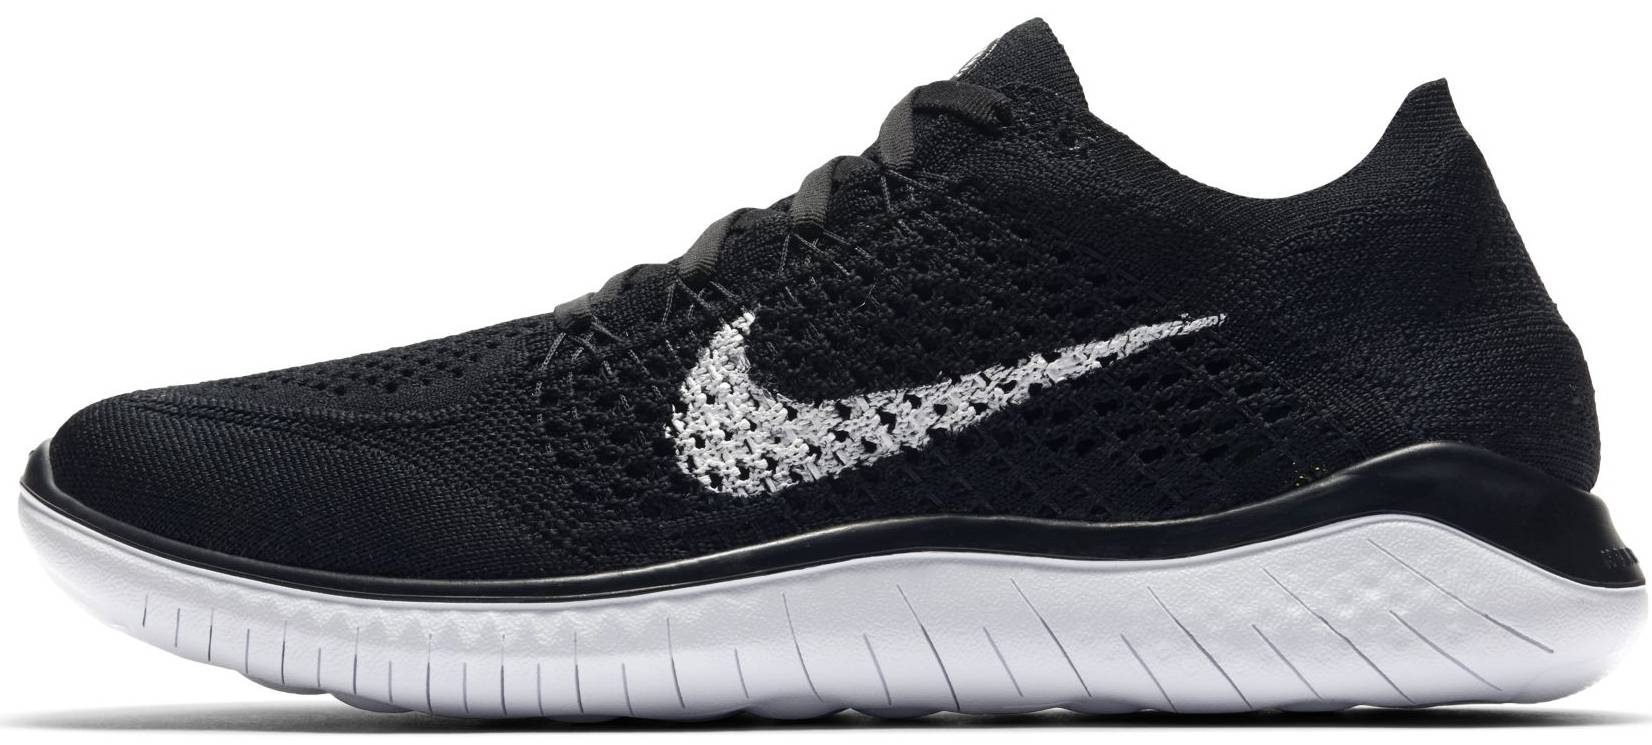 Nike Free RN Flyknit 2018 Review 2022, Facts, Deals ($76) | RunRepeat